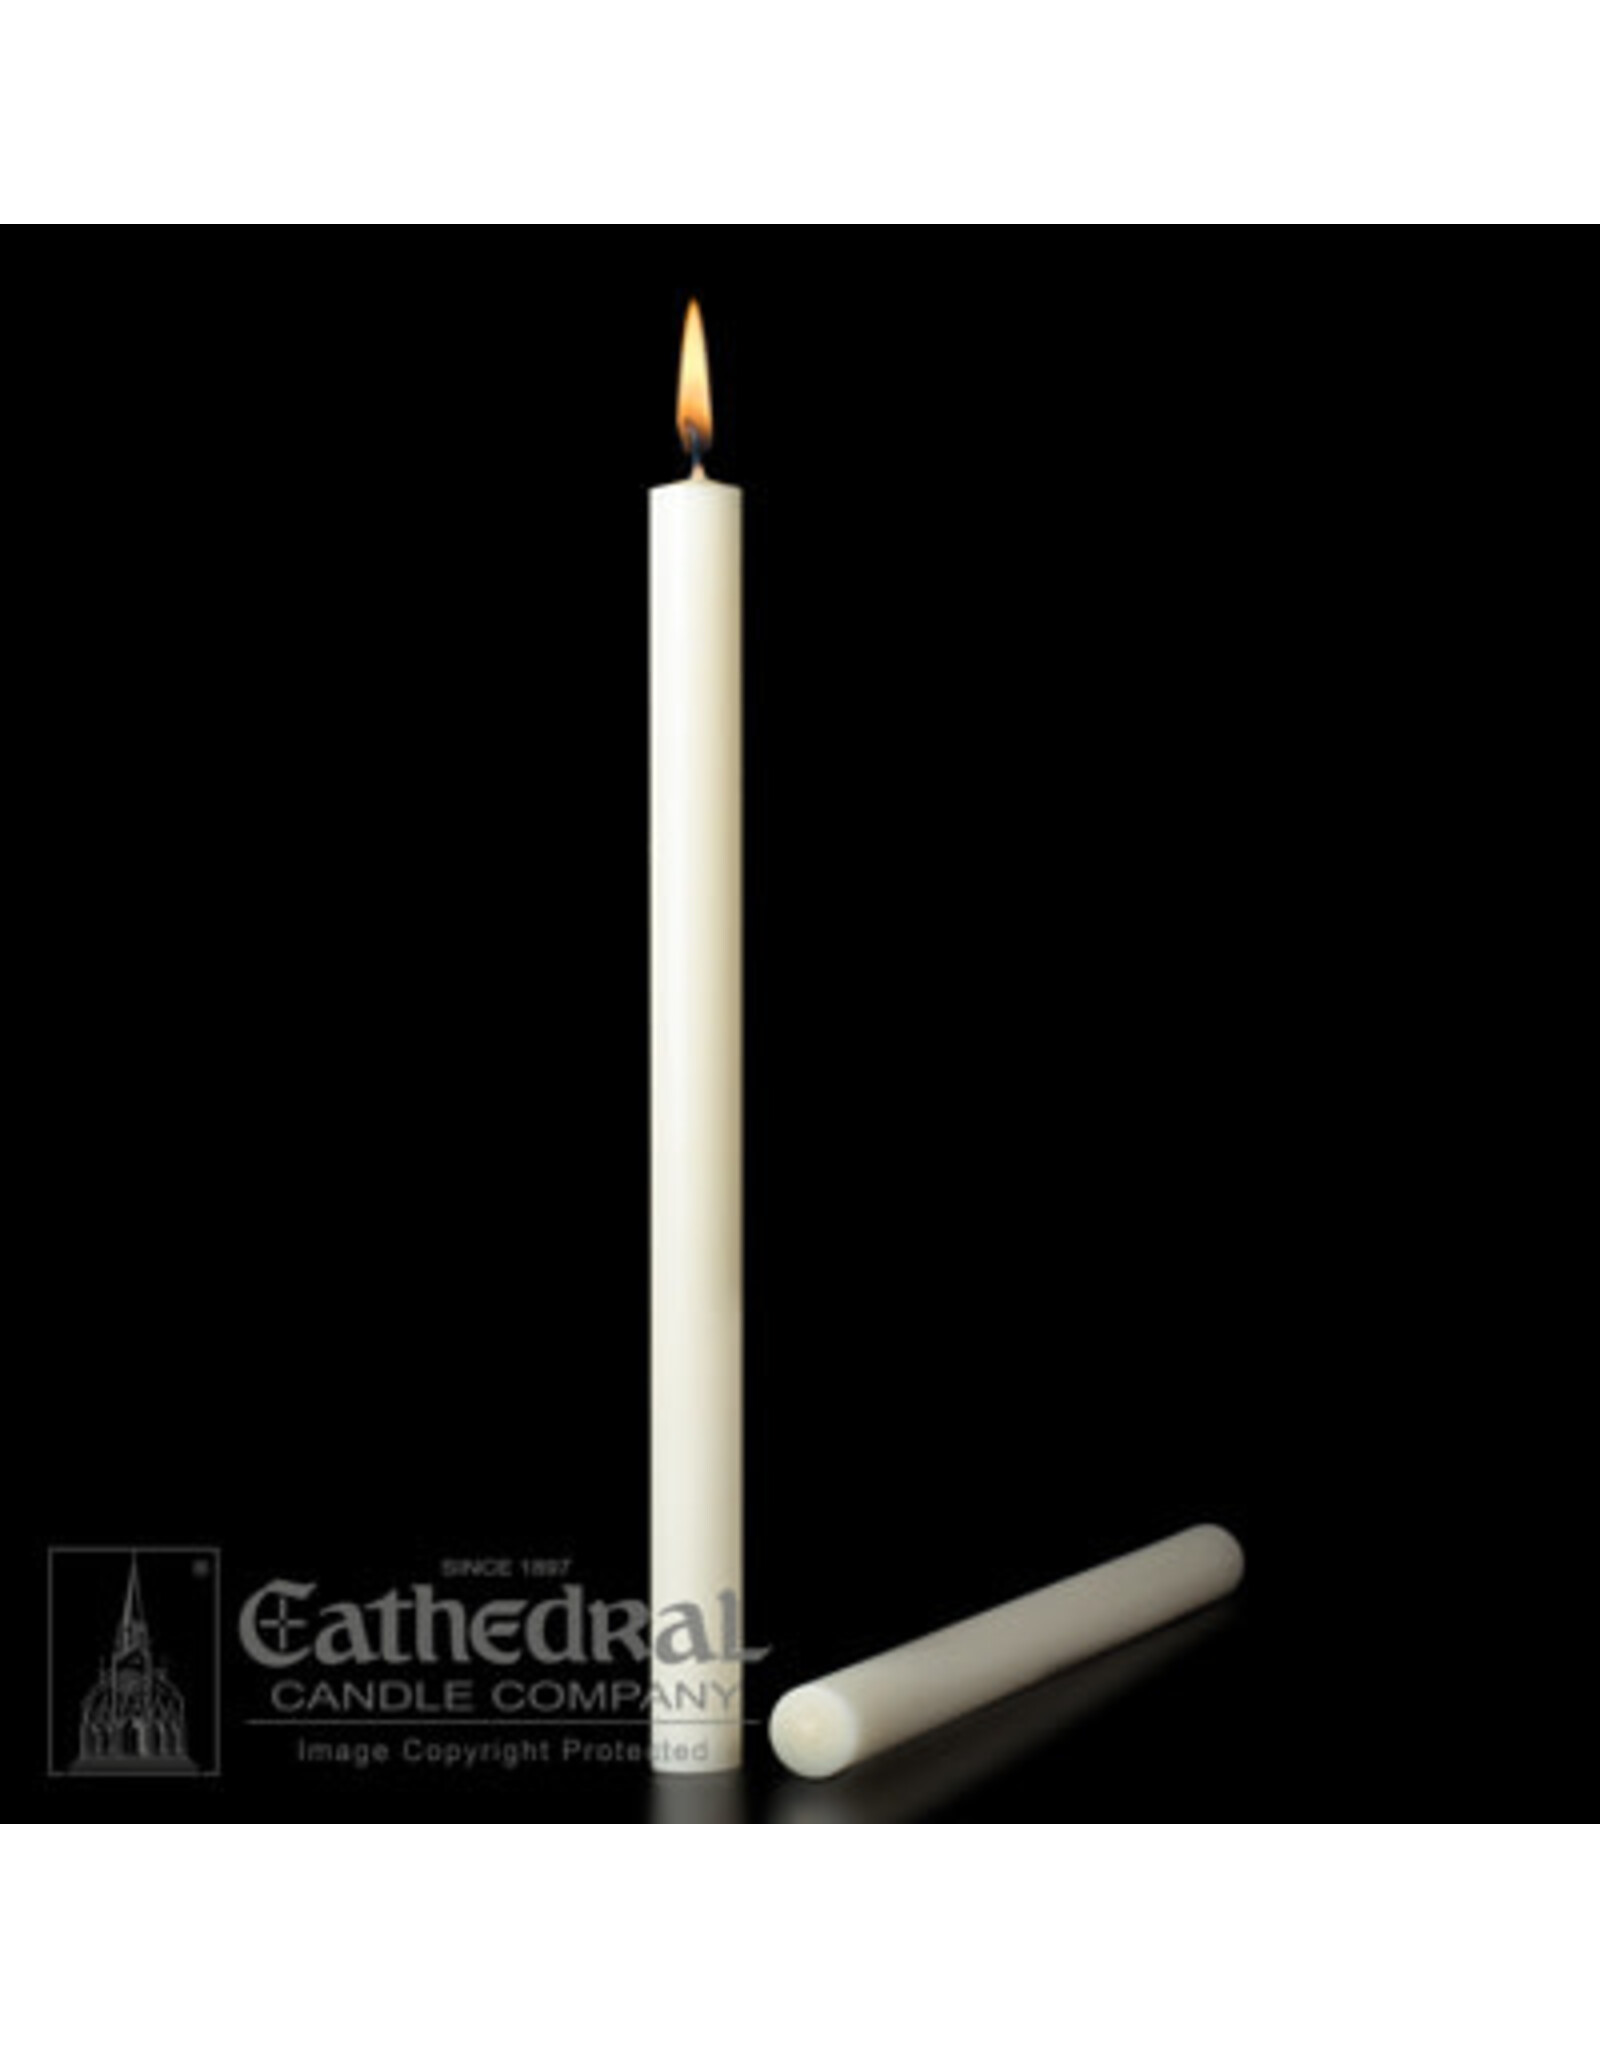 Cathedral Candle 51% Beeswax Altar Candles 2"x24" PE (6)